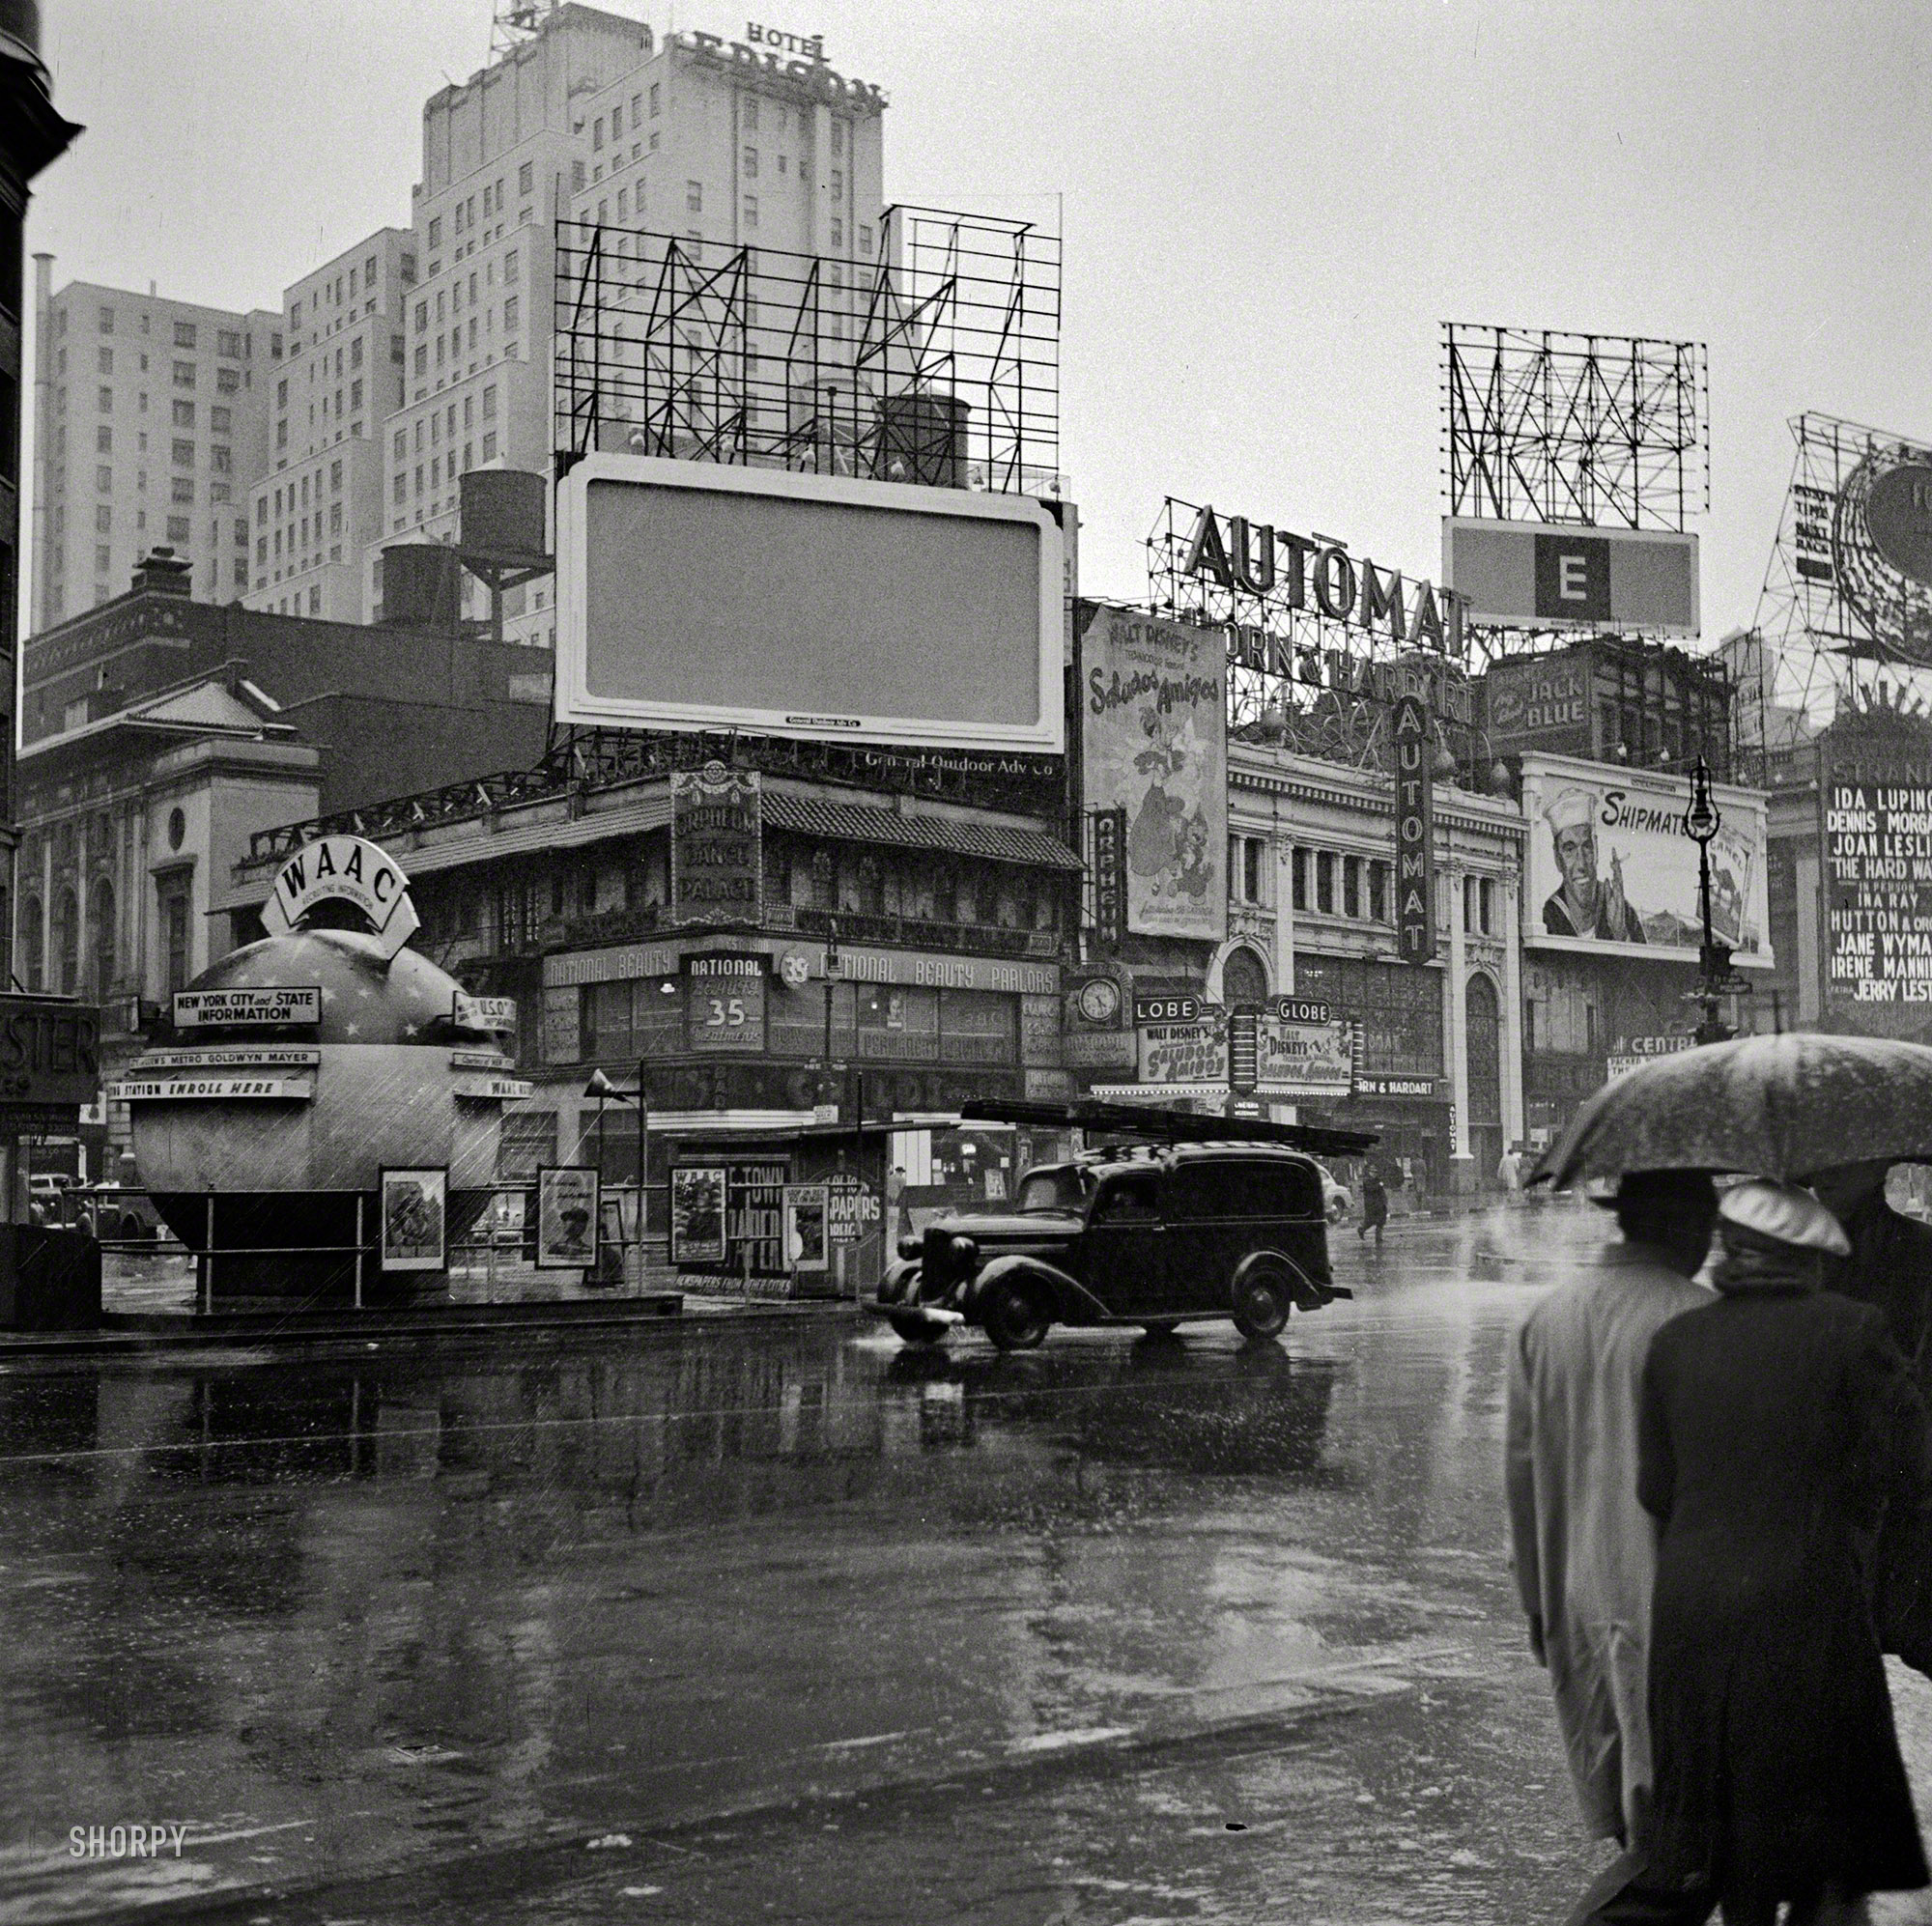 March 1943. "New York, N.Y. Times Square on a rainy day." Now playing: Disney's "Saludos Amigos." Afterward we can grab a bite at the Automat. Medium format negative by John Vachon, Office of War Information. View full size.